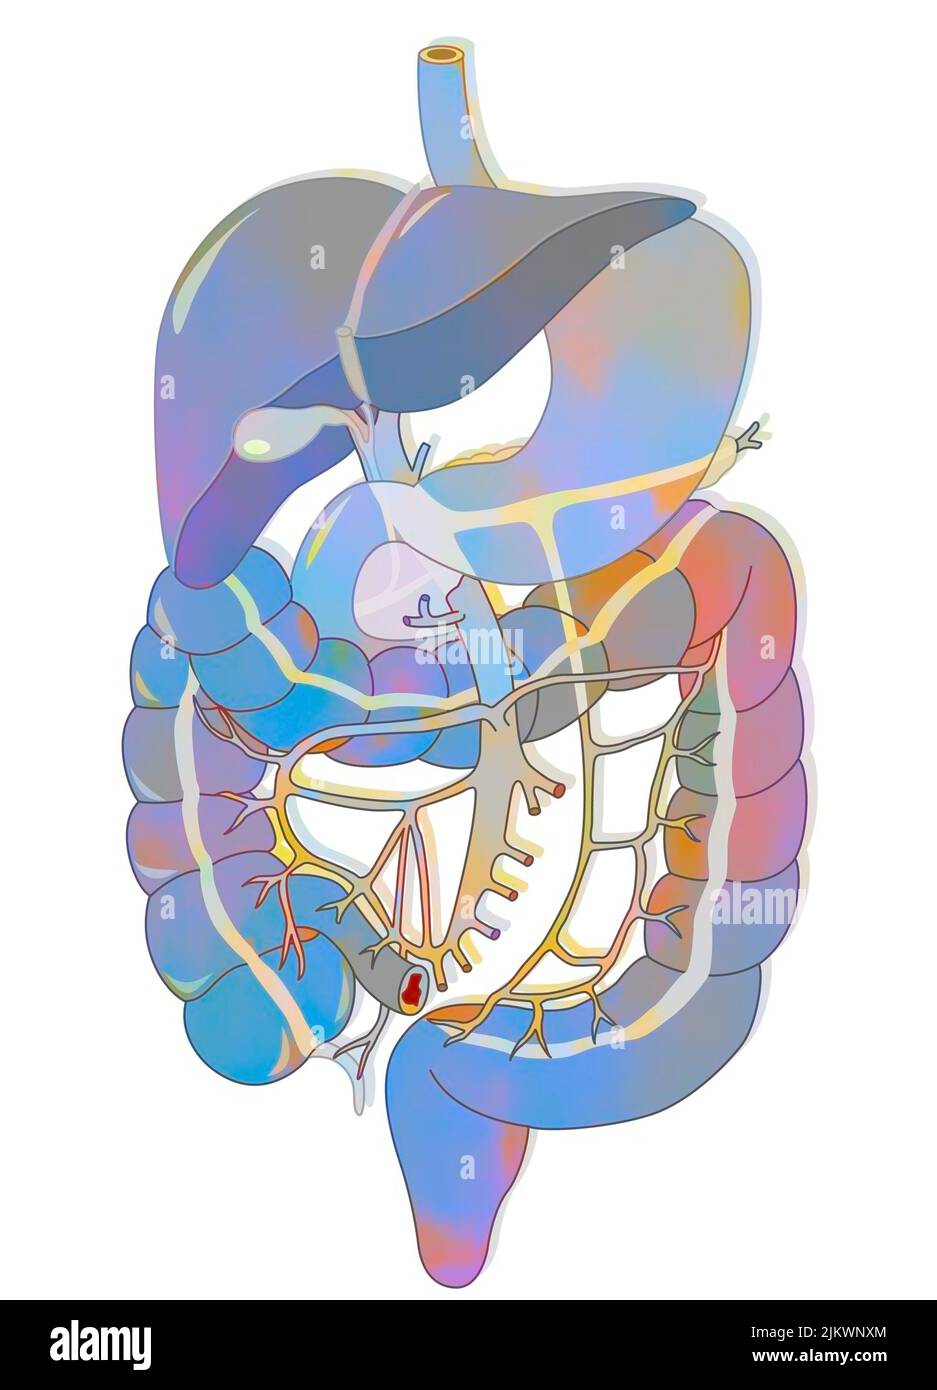 Digestive system: portal system, from the portal vein to the various collaterals. Stock Photo